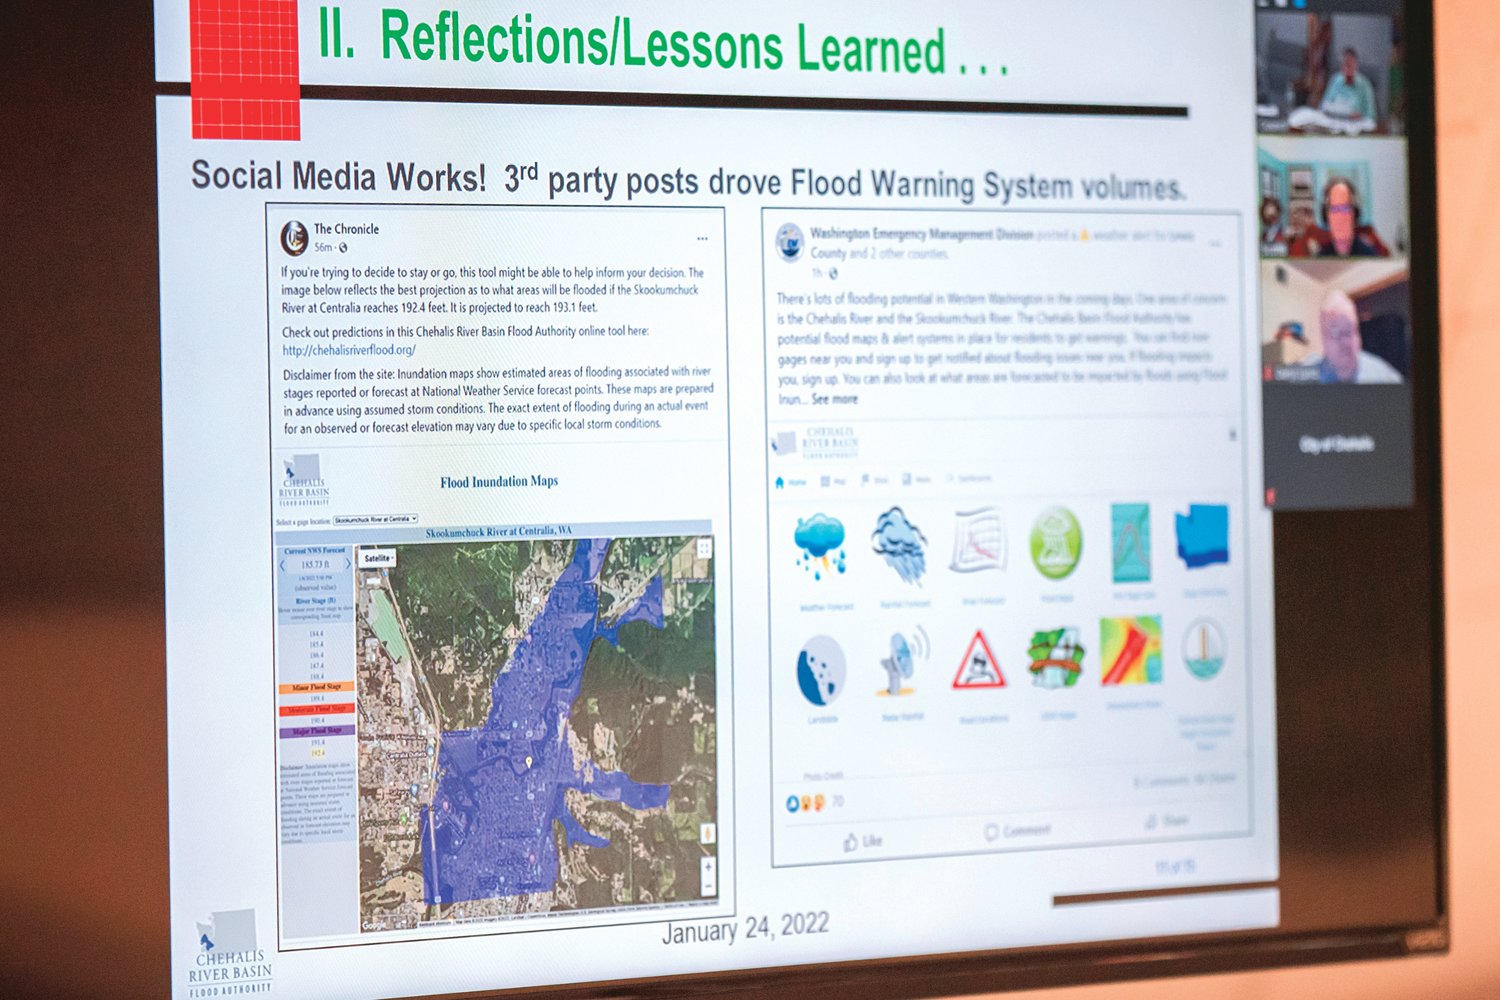 Posts from The Chronicle and the Washington Emergency Management Division were highlighted in discussions about the Flood Warning System volumes.